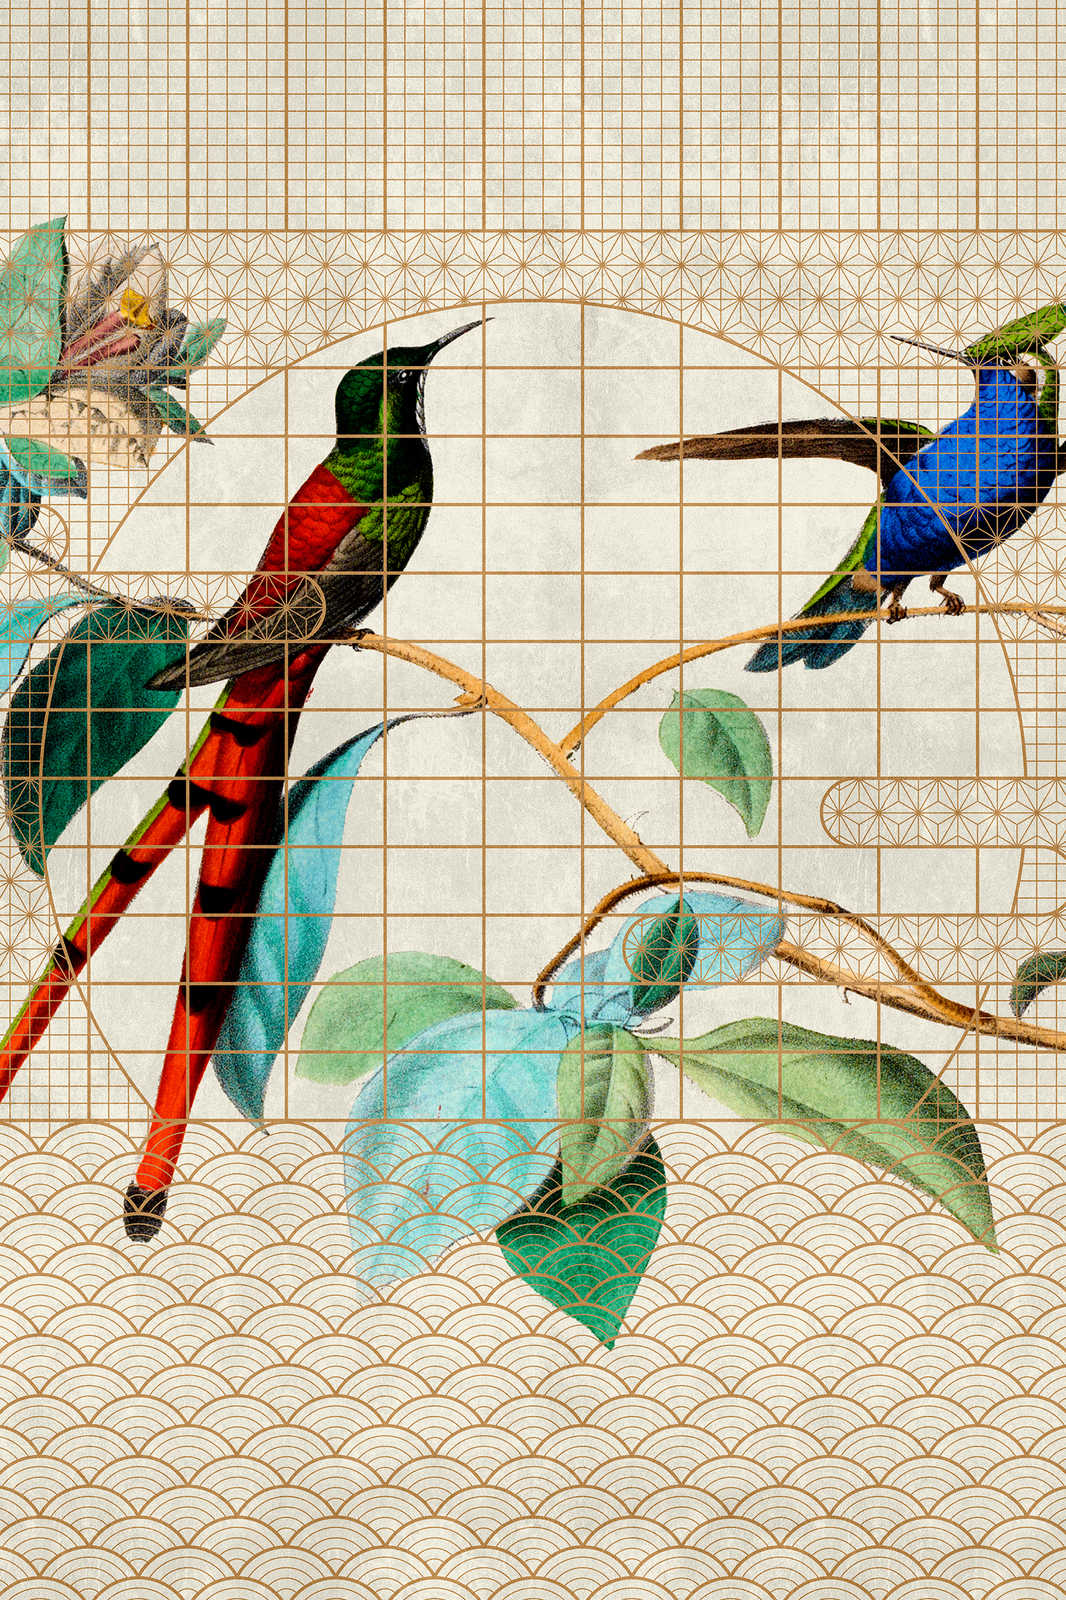             Aviary 2 - Birds Canvas painting Songbirds in a golden cage - 1.20 m x 0.80 m
        